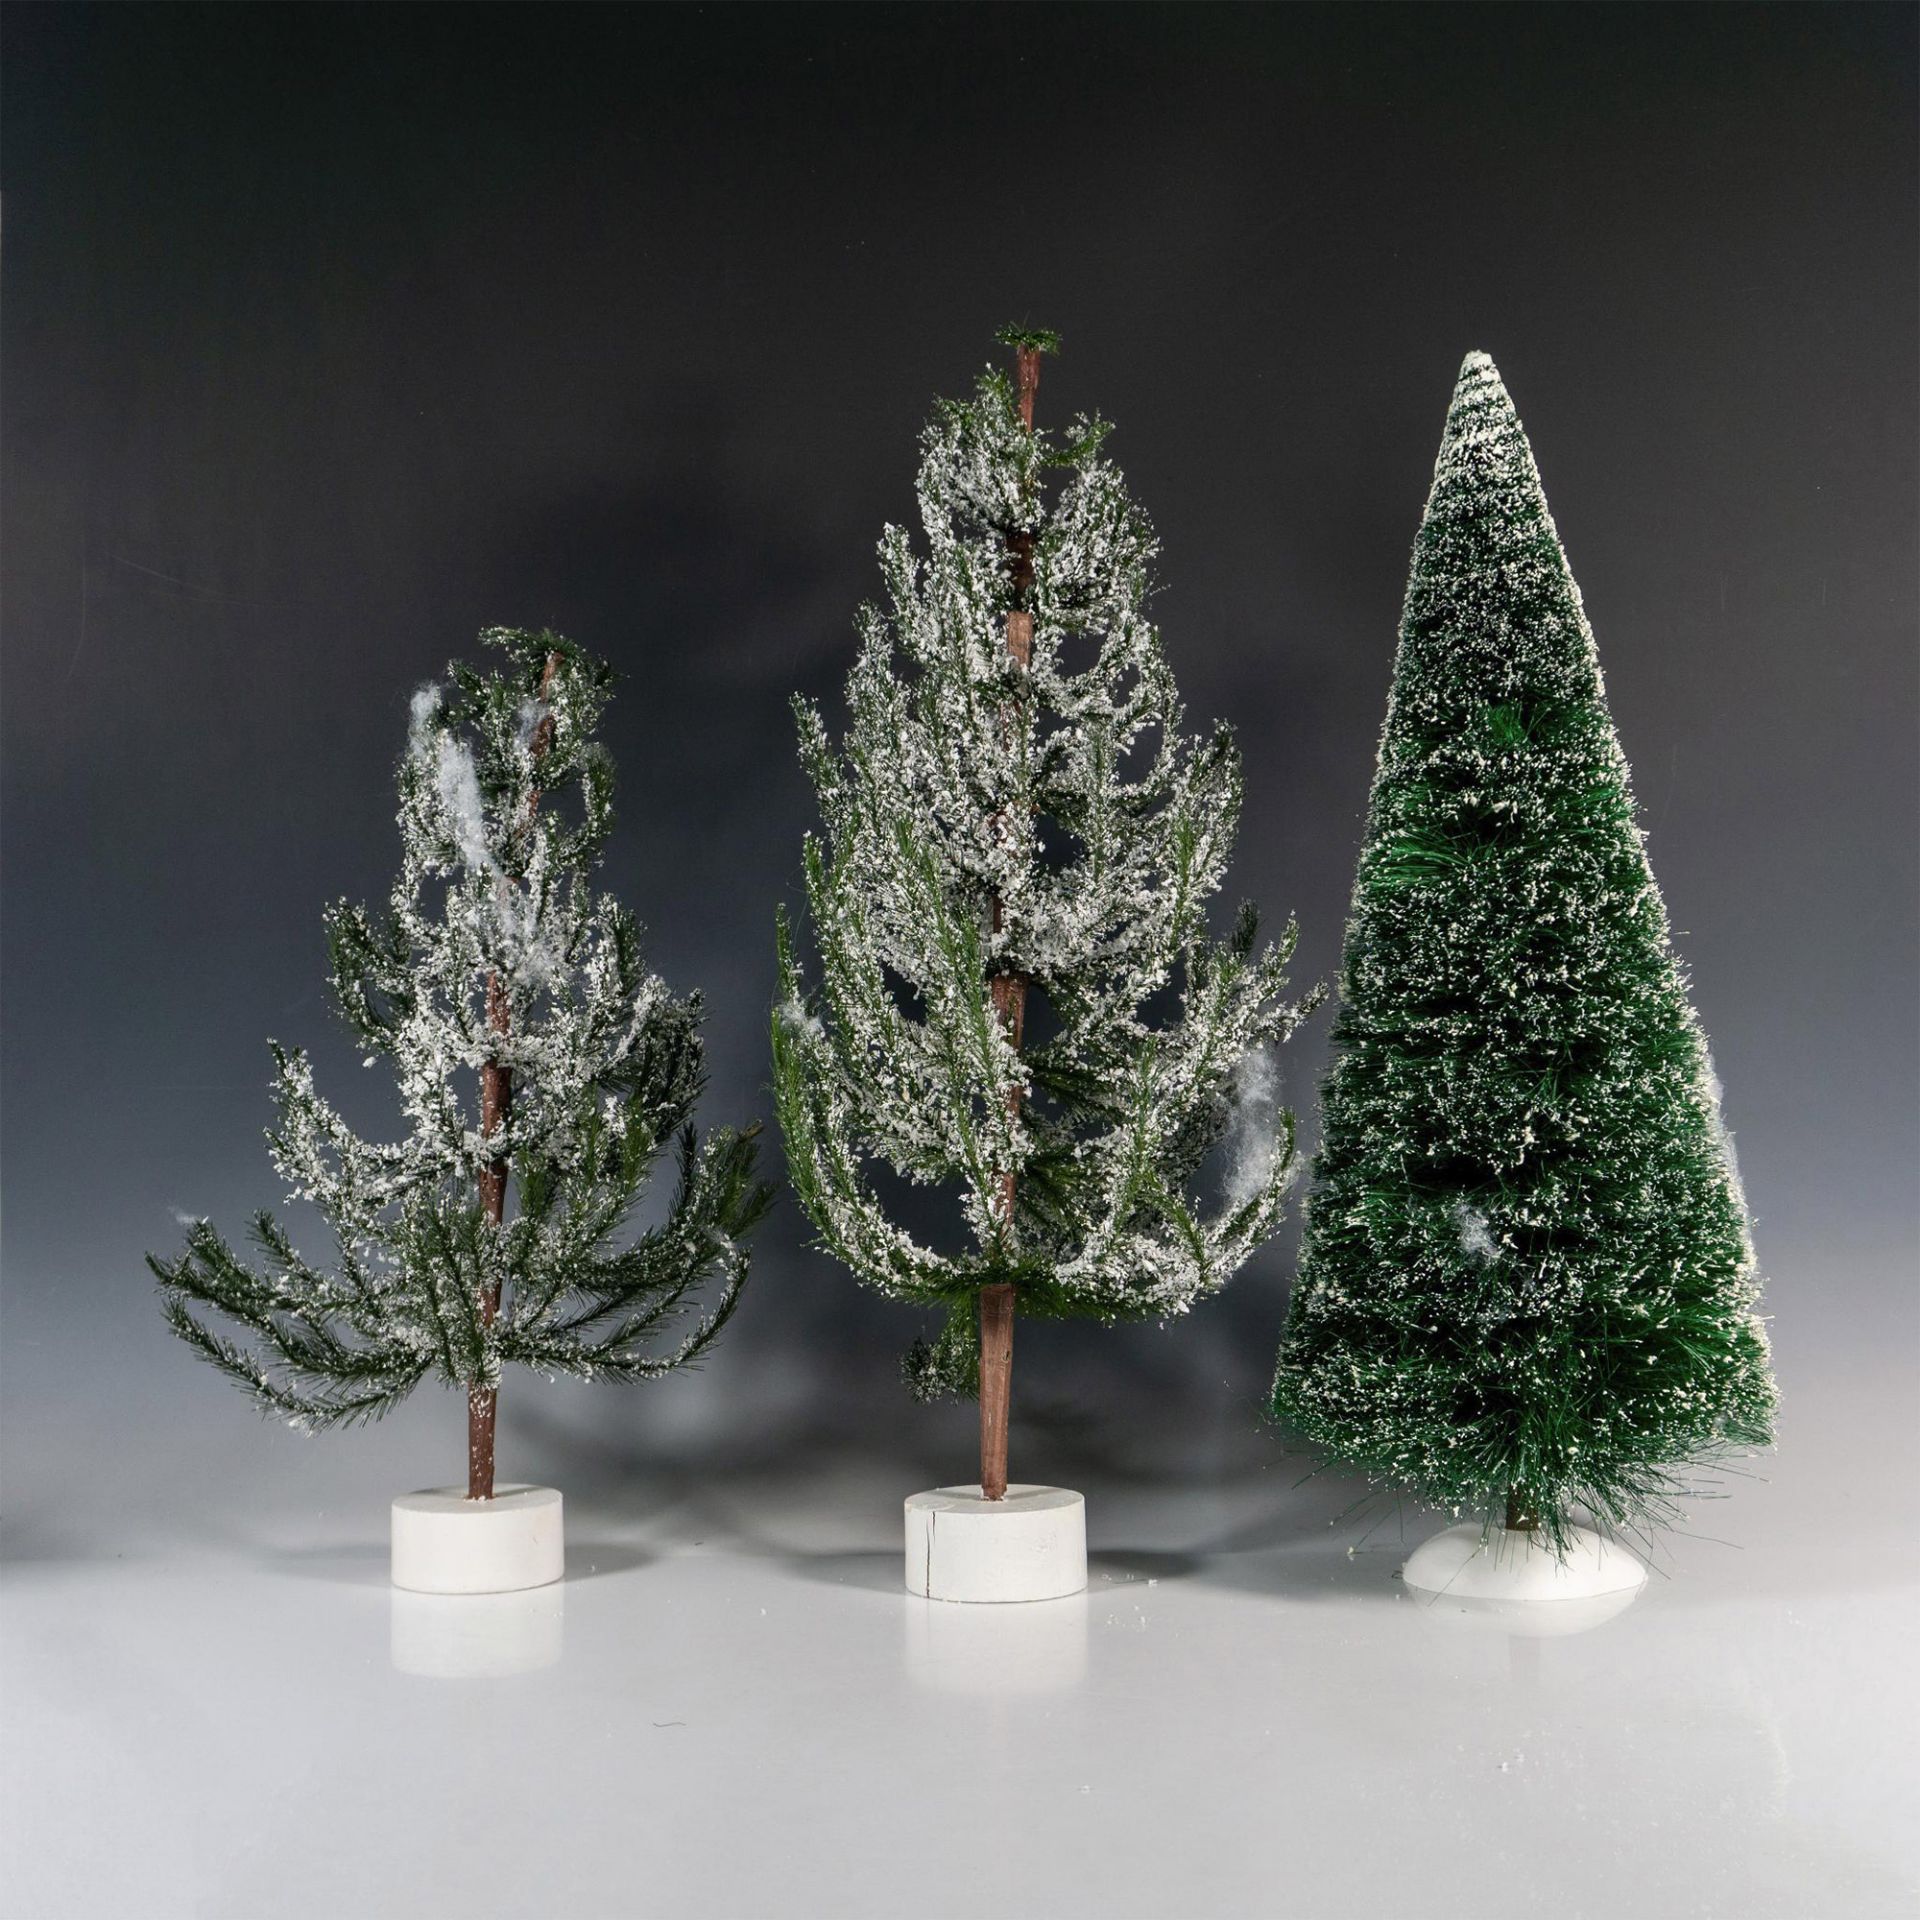 3pc Department 56 Village Accessory Trees Figurines